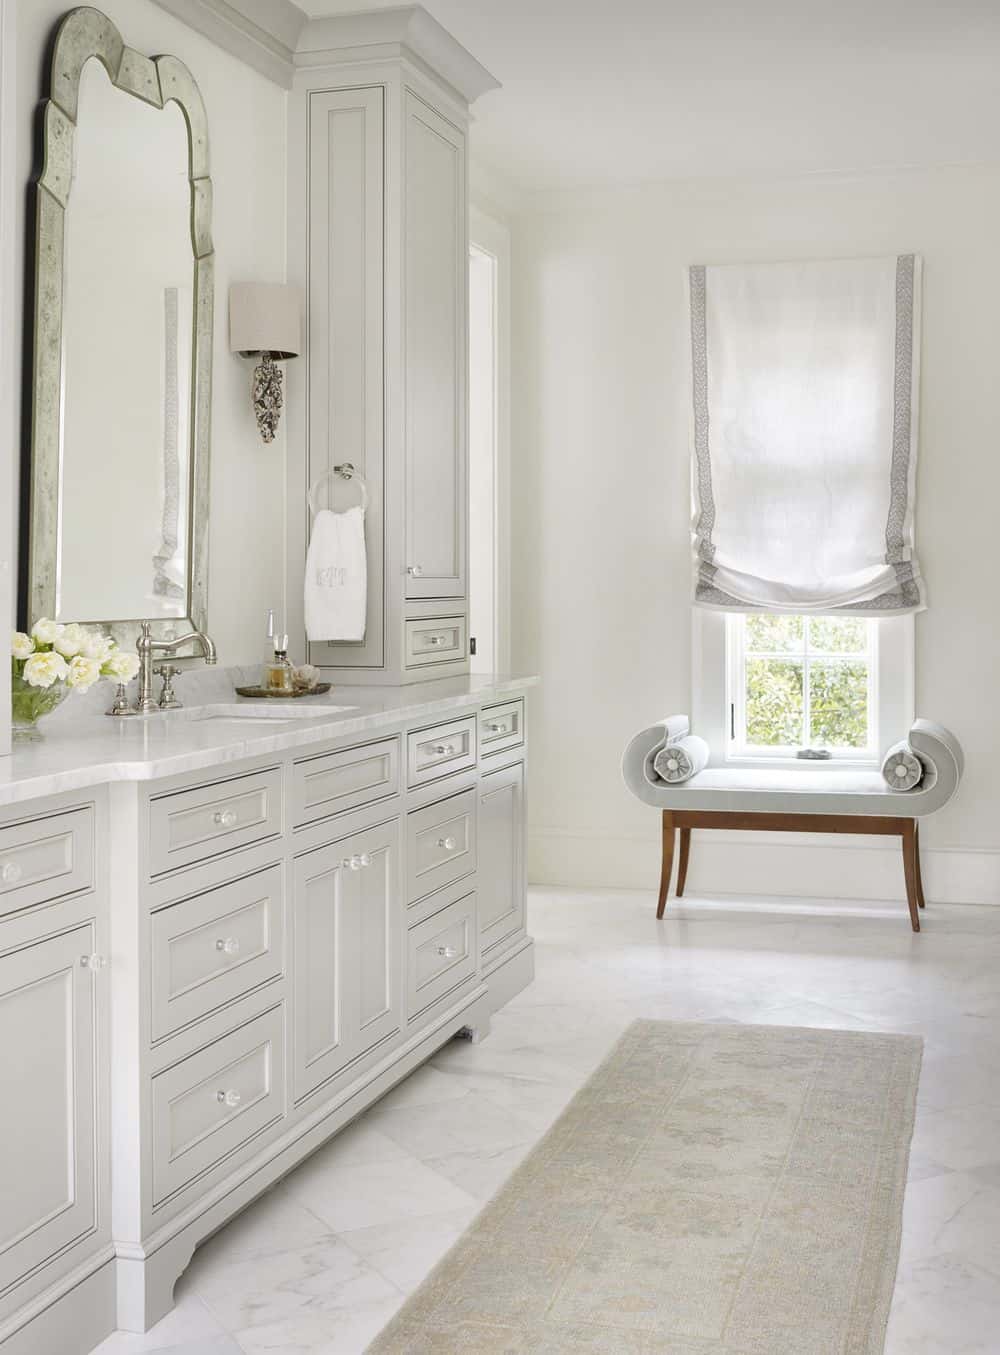 Bathroom bench and stool ideas to 